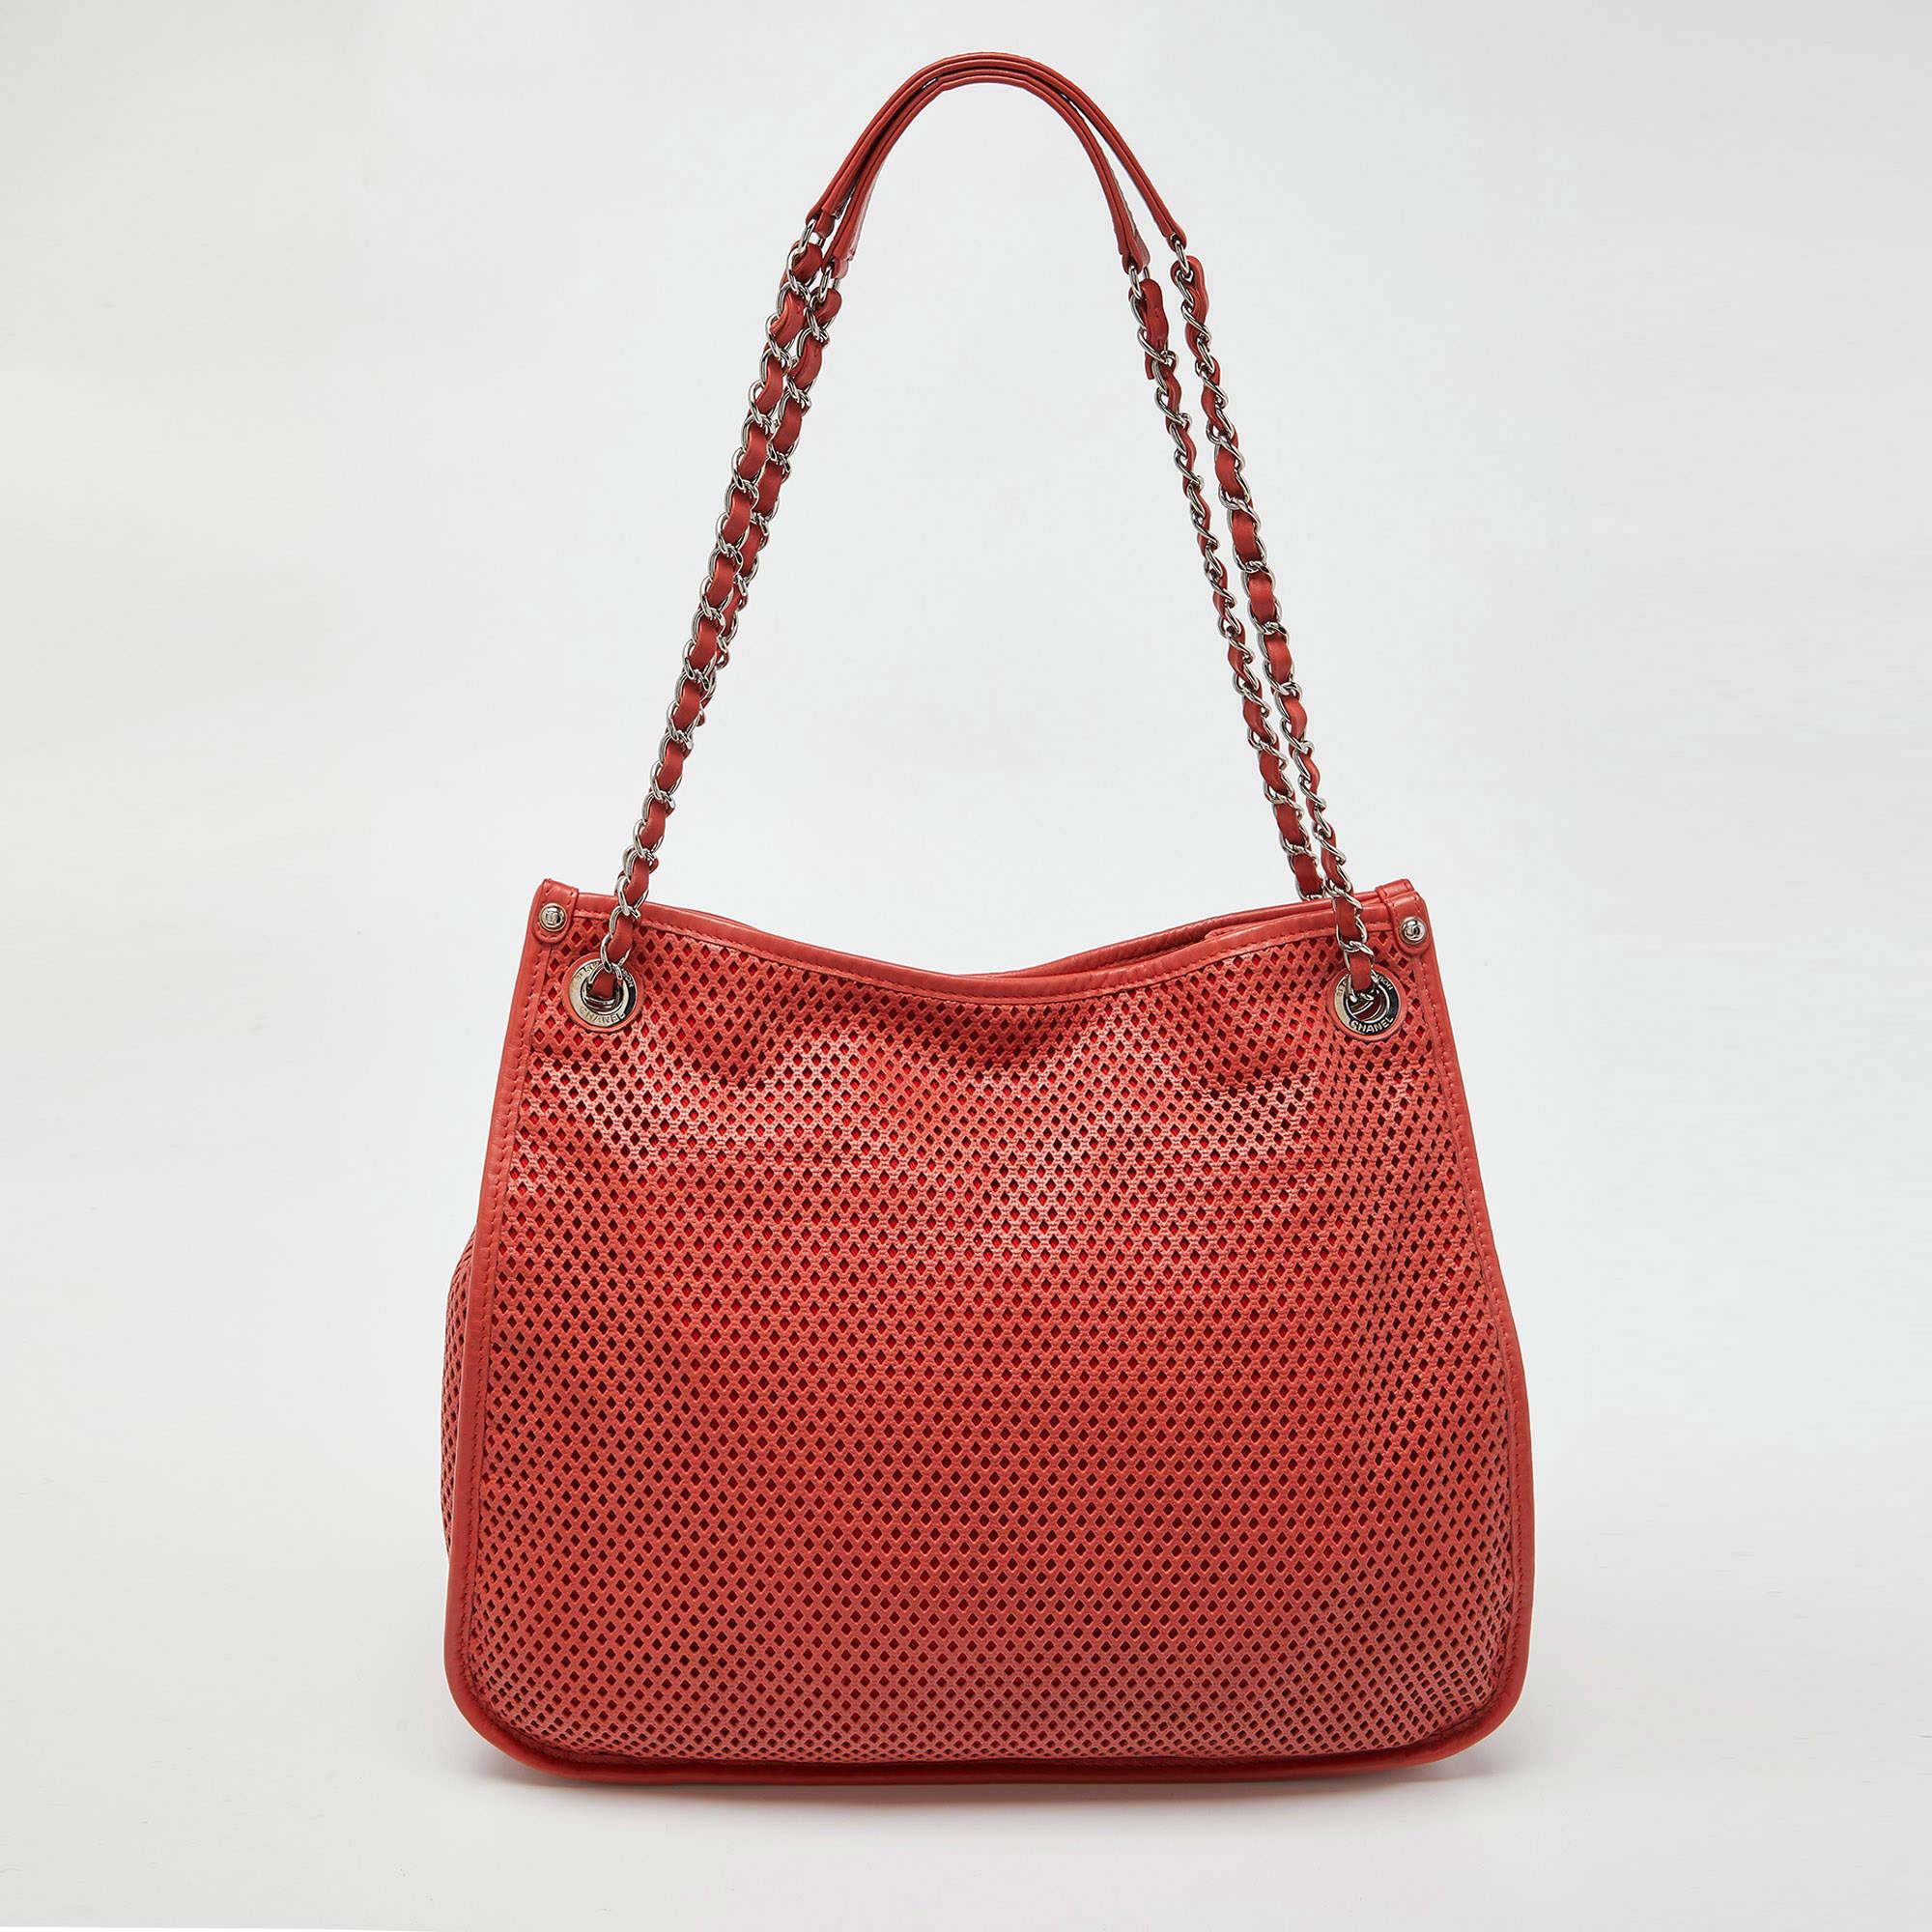 Women's Chanel Red Perforated Leather Up in the Air Shoulder Bag